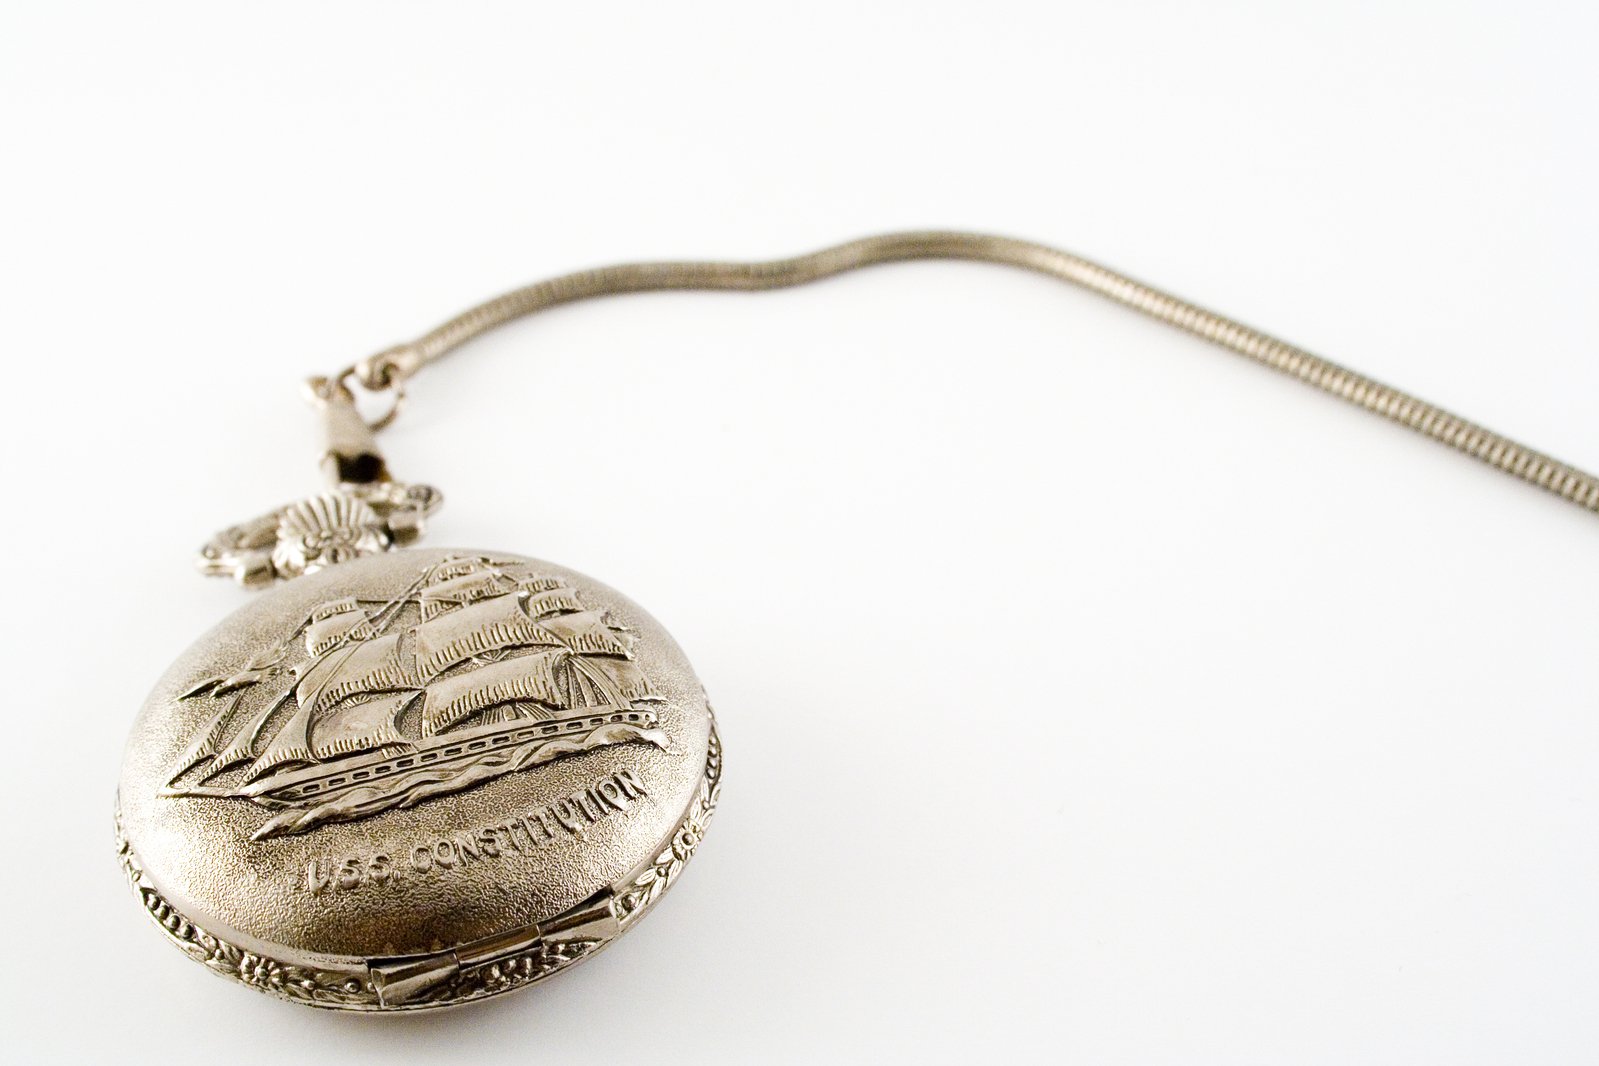 the gold pocket watch has been worn as a necklace